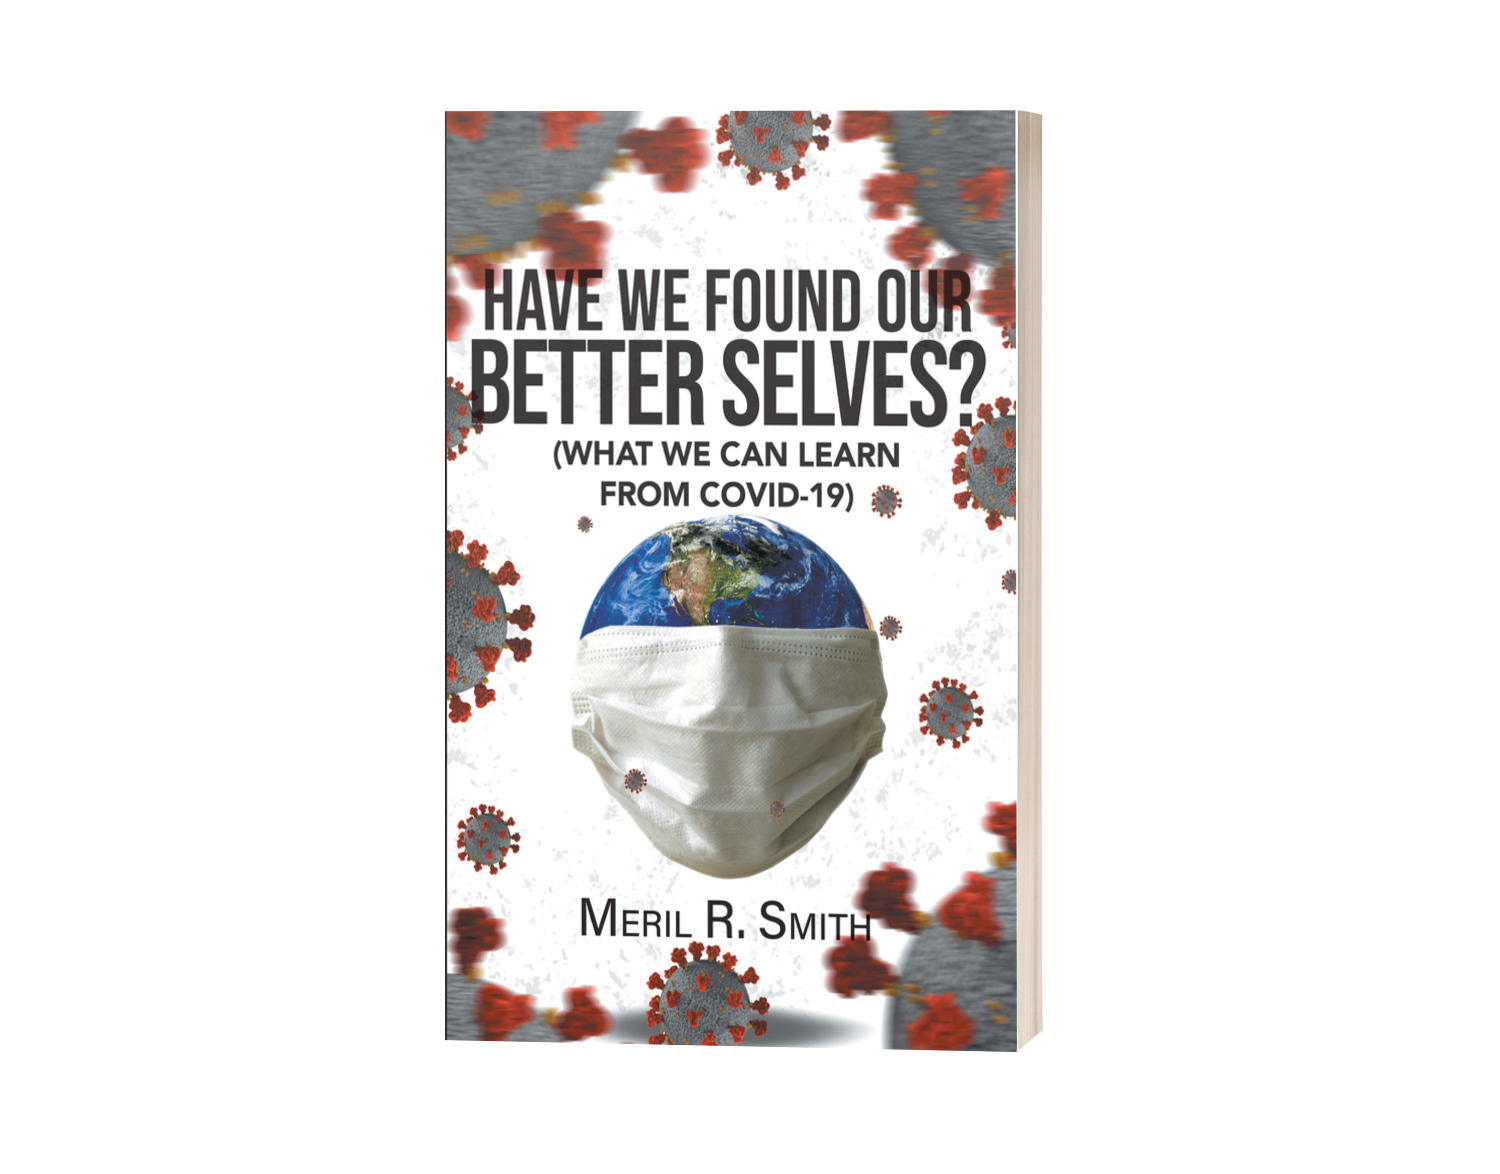 Finding ‘Our Better Selves’ Amidst Mankind’s Worst Situations